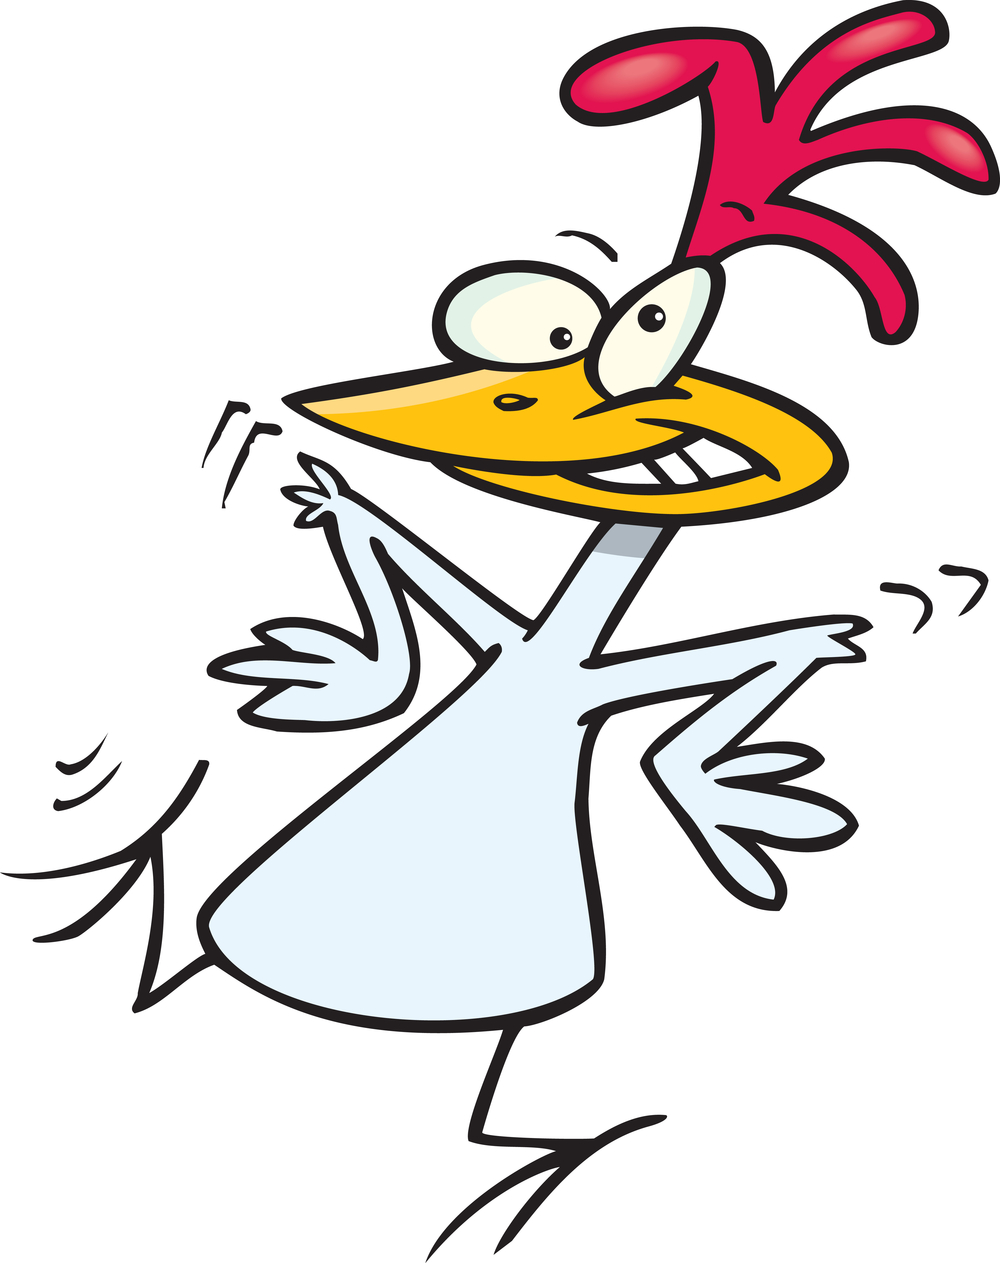 animated chicken clipart - photo #46